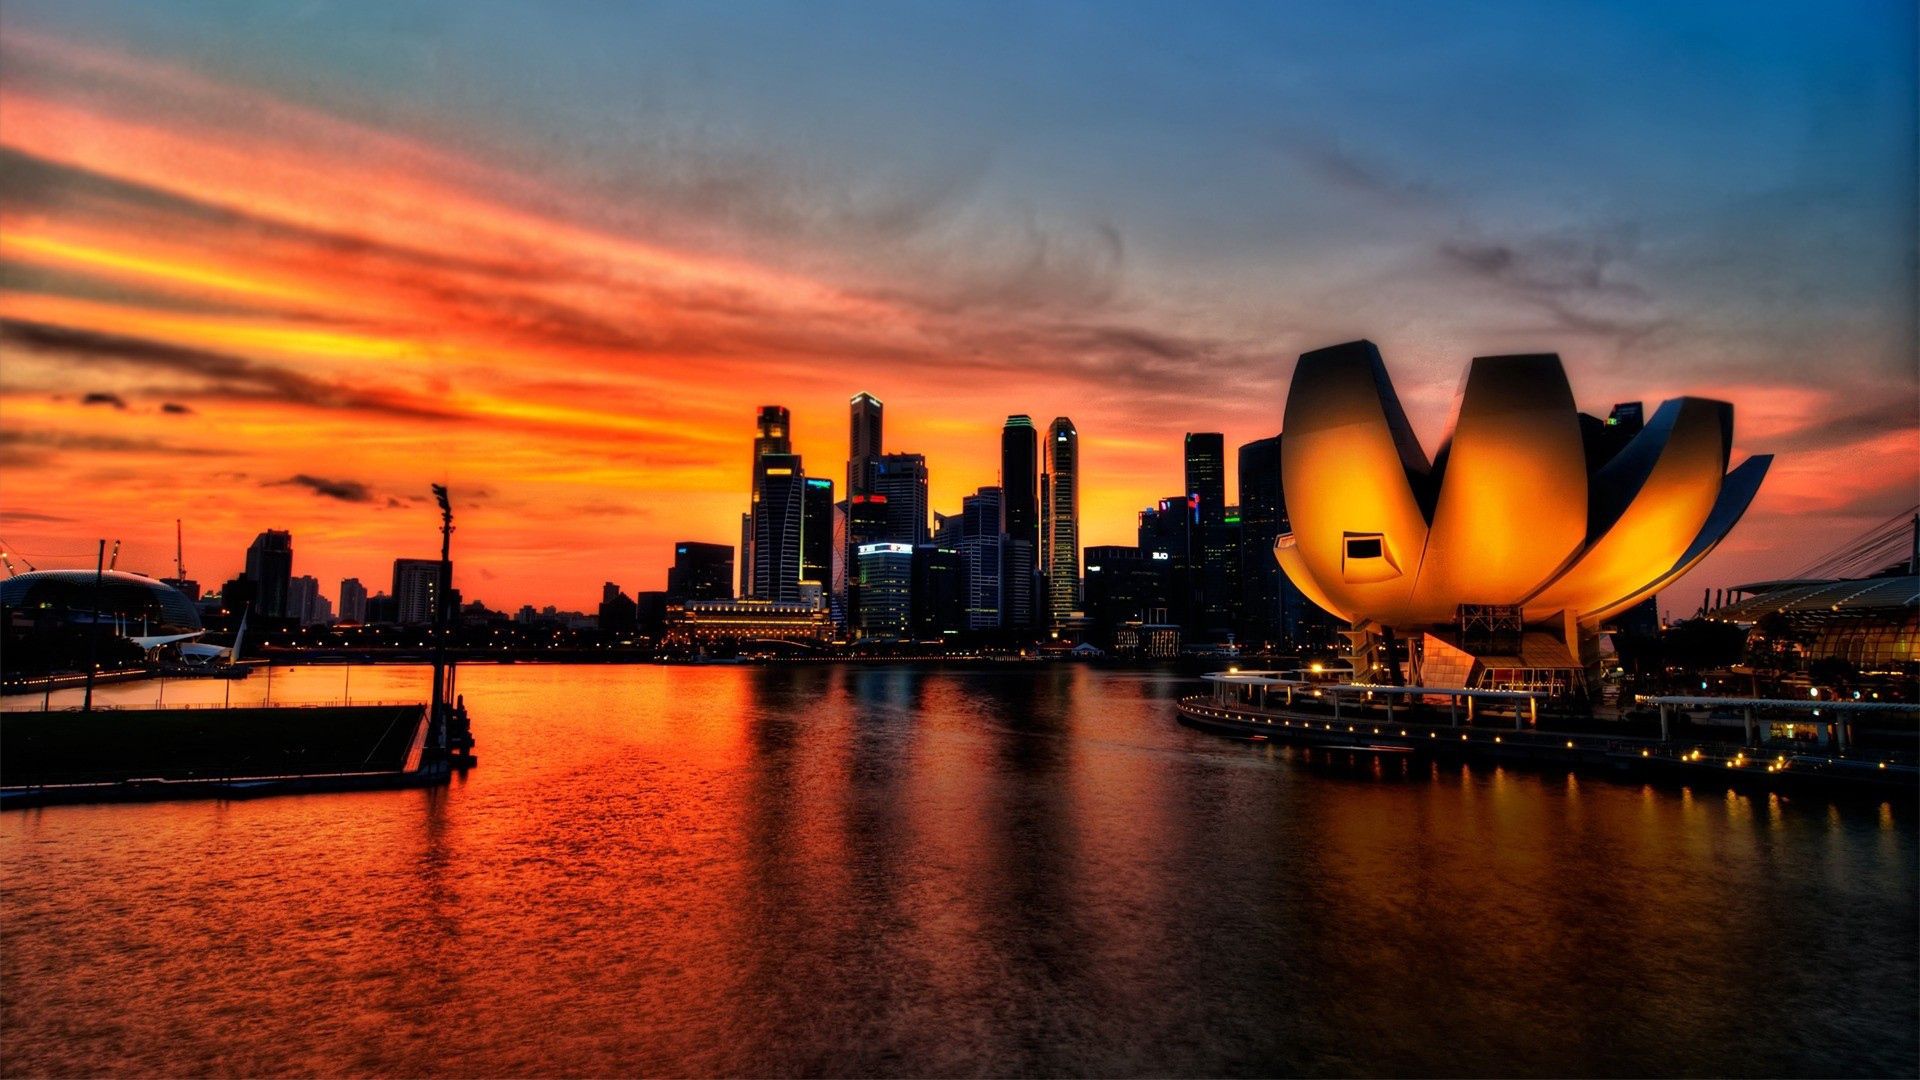 Mobile wallpaper: Cities, Sunset, Sky, Singapore, Shine, Light, 148467  download the picture for free.